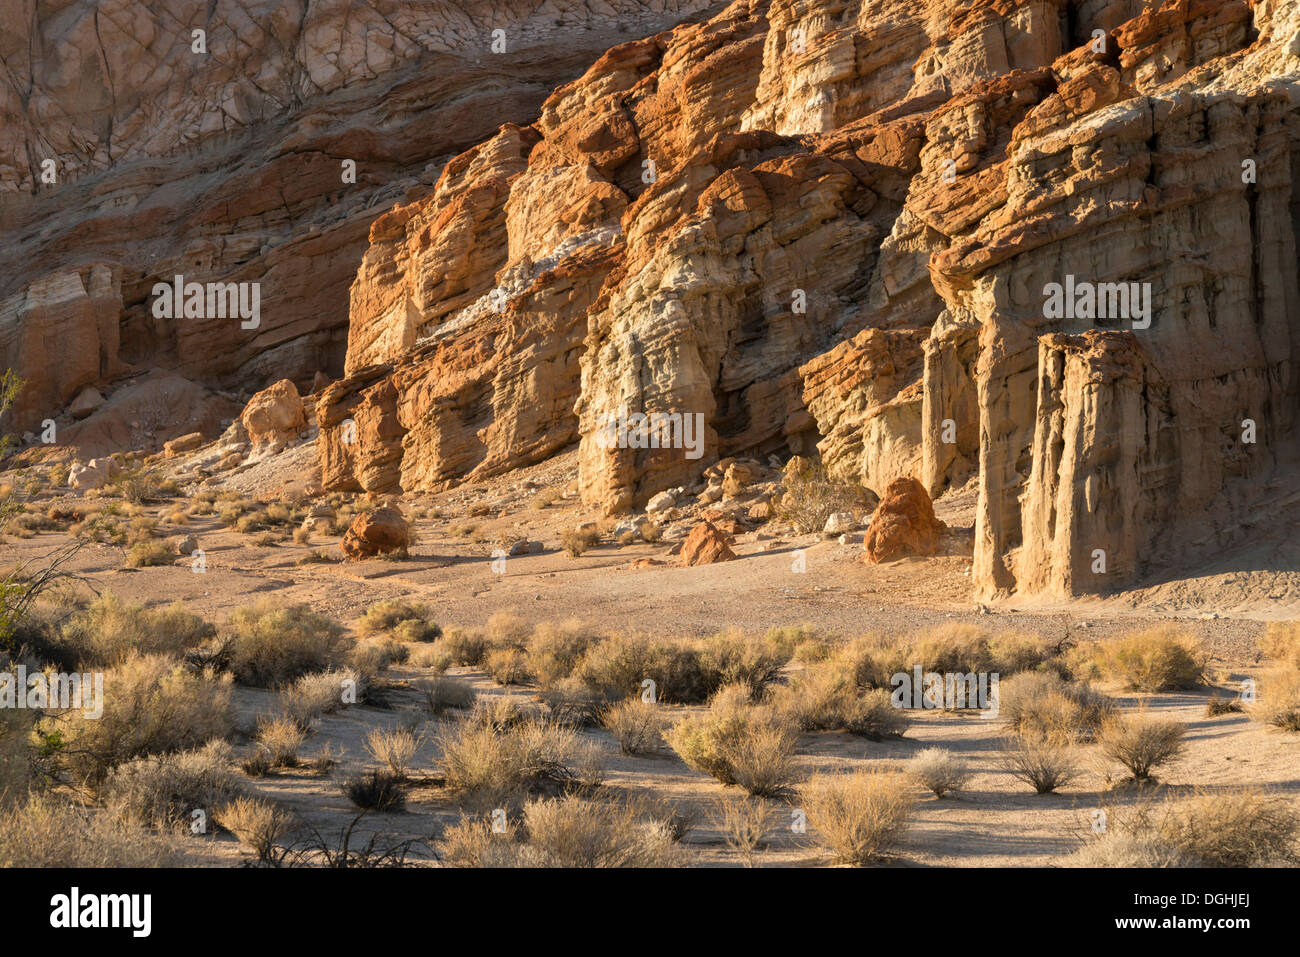 Rock formations at sunset in California's Red Rock Canyon State Park. Stock Photo